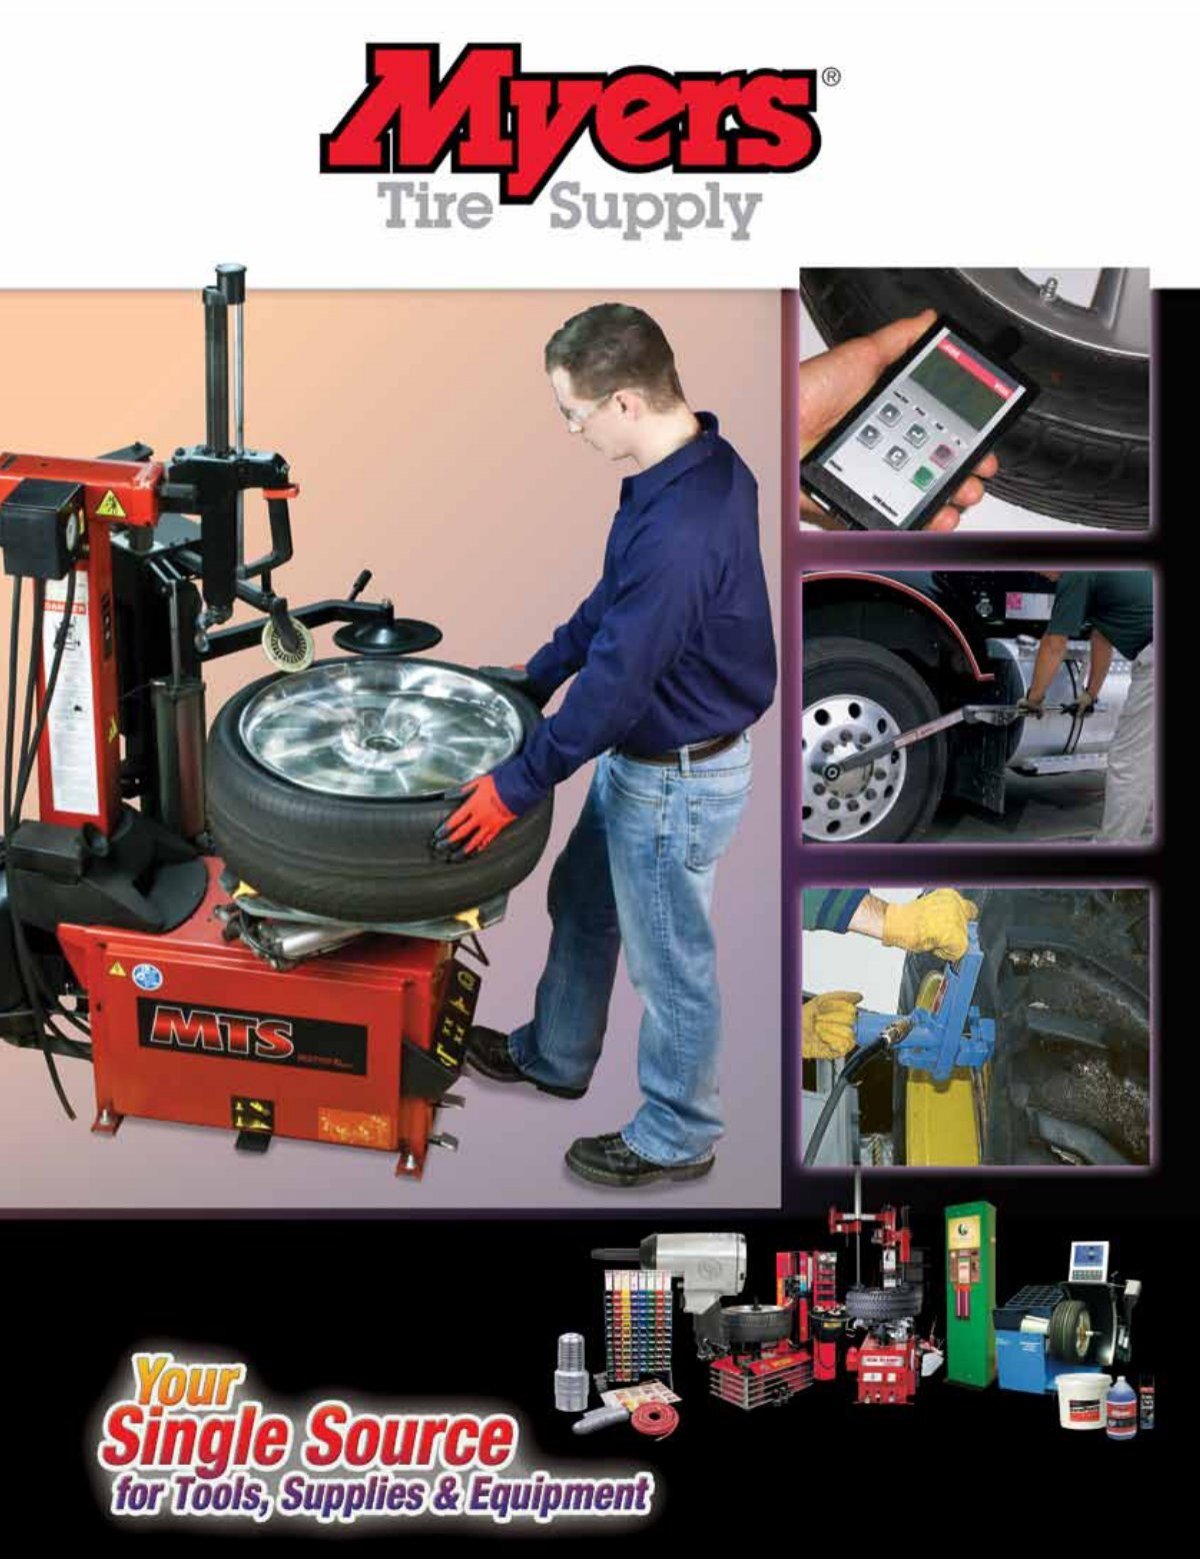 tire supply tools